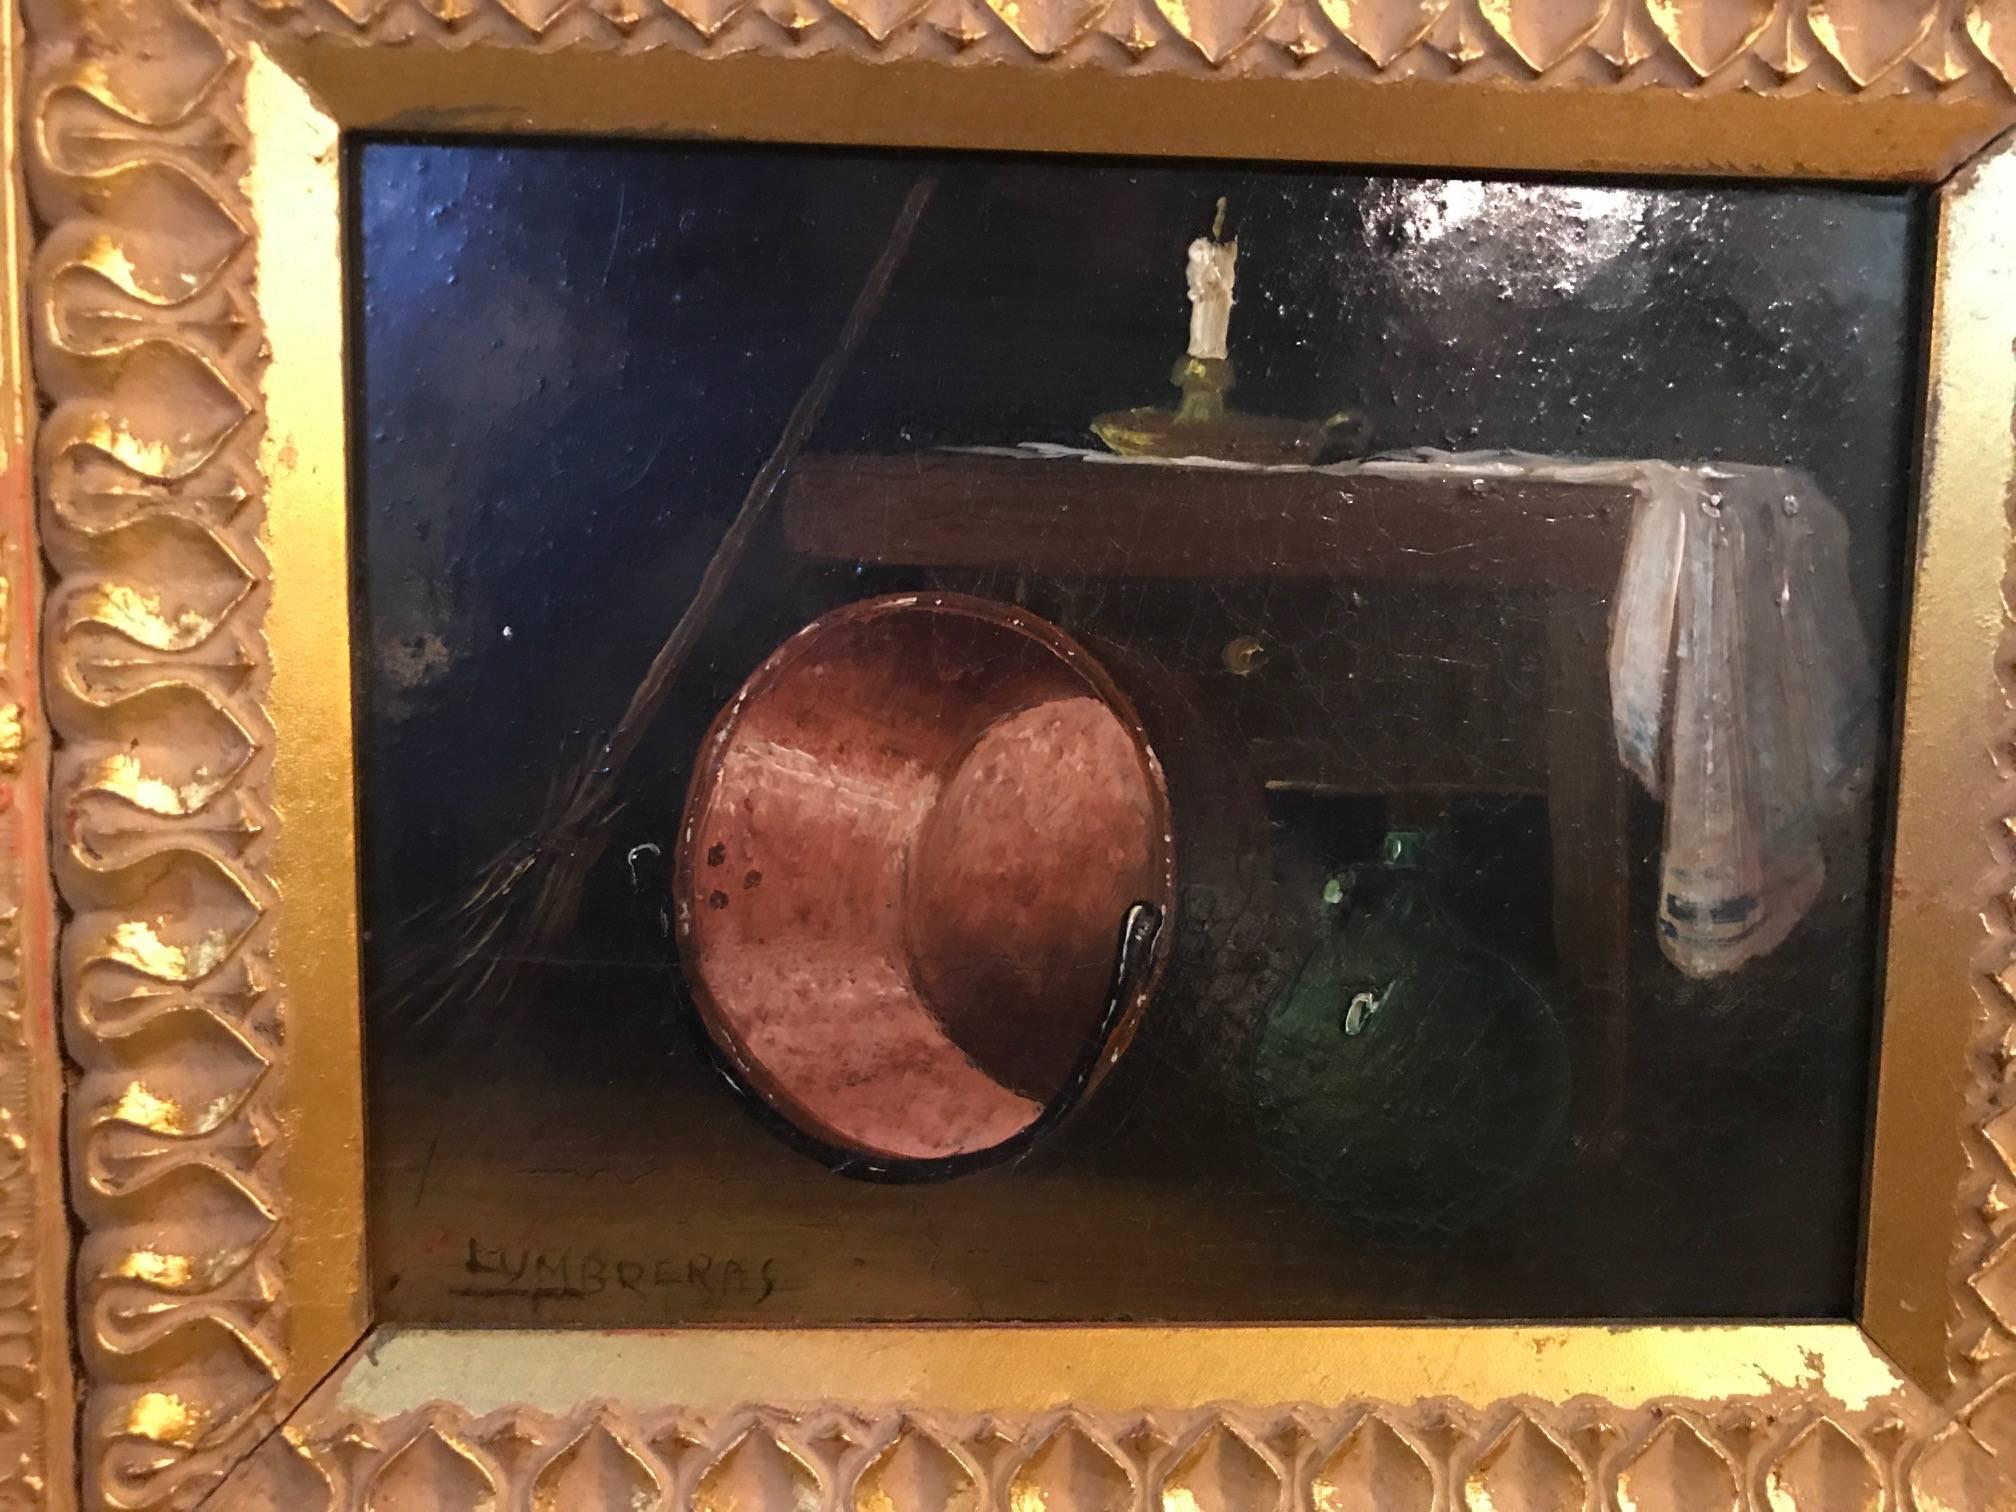 A well painted diminutive oil on panel of a draped table with everyday items. Well executed still life with great detail and form. The frame is a double layered wood and gesso frame that compliments this painting and bring it to a very high level,